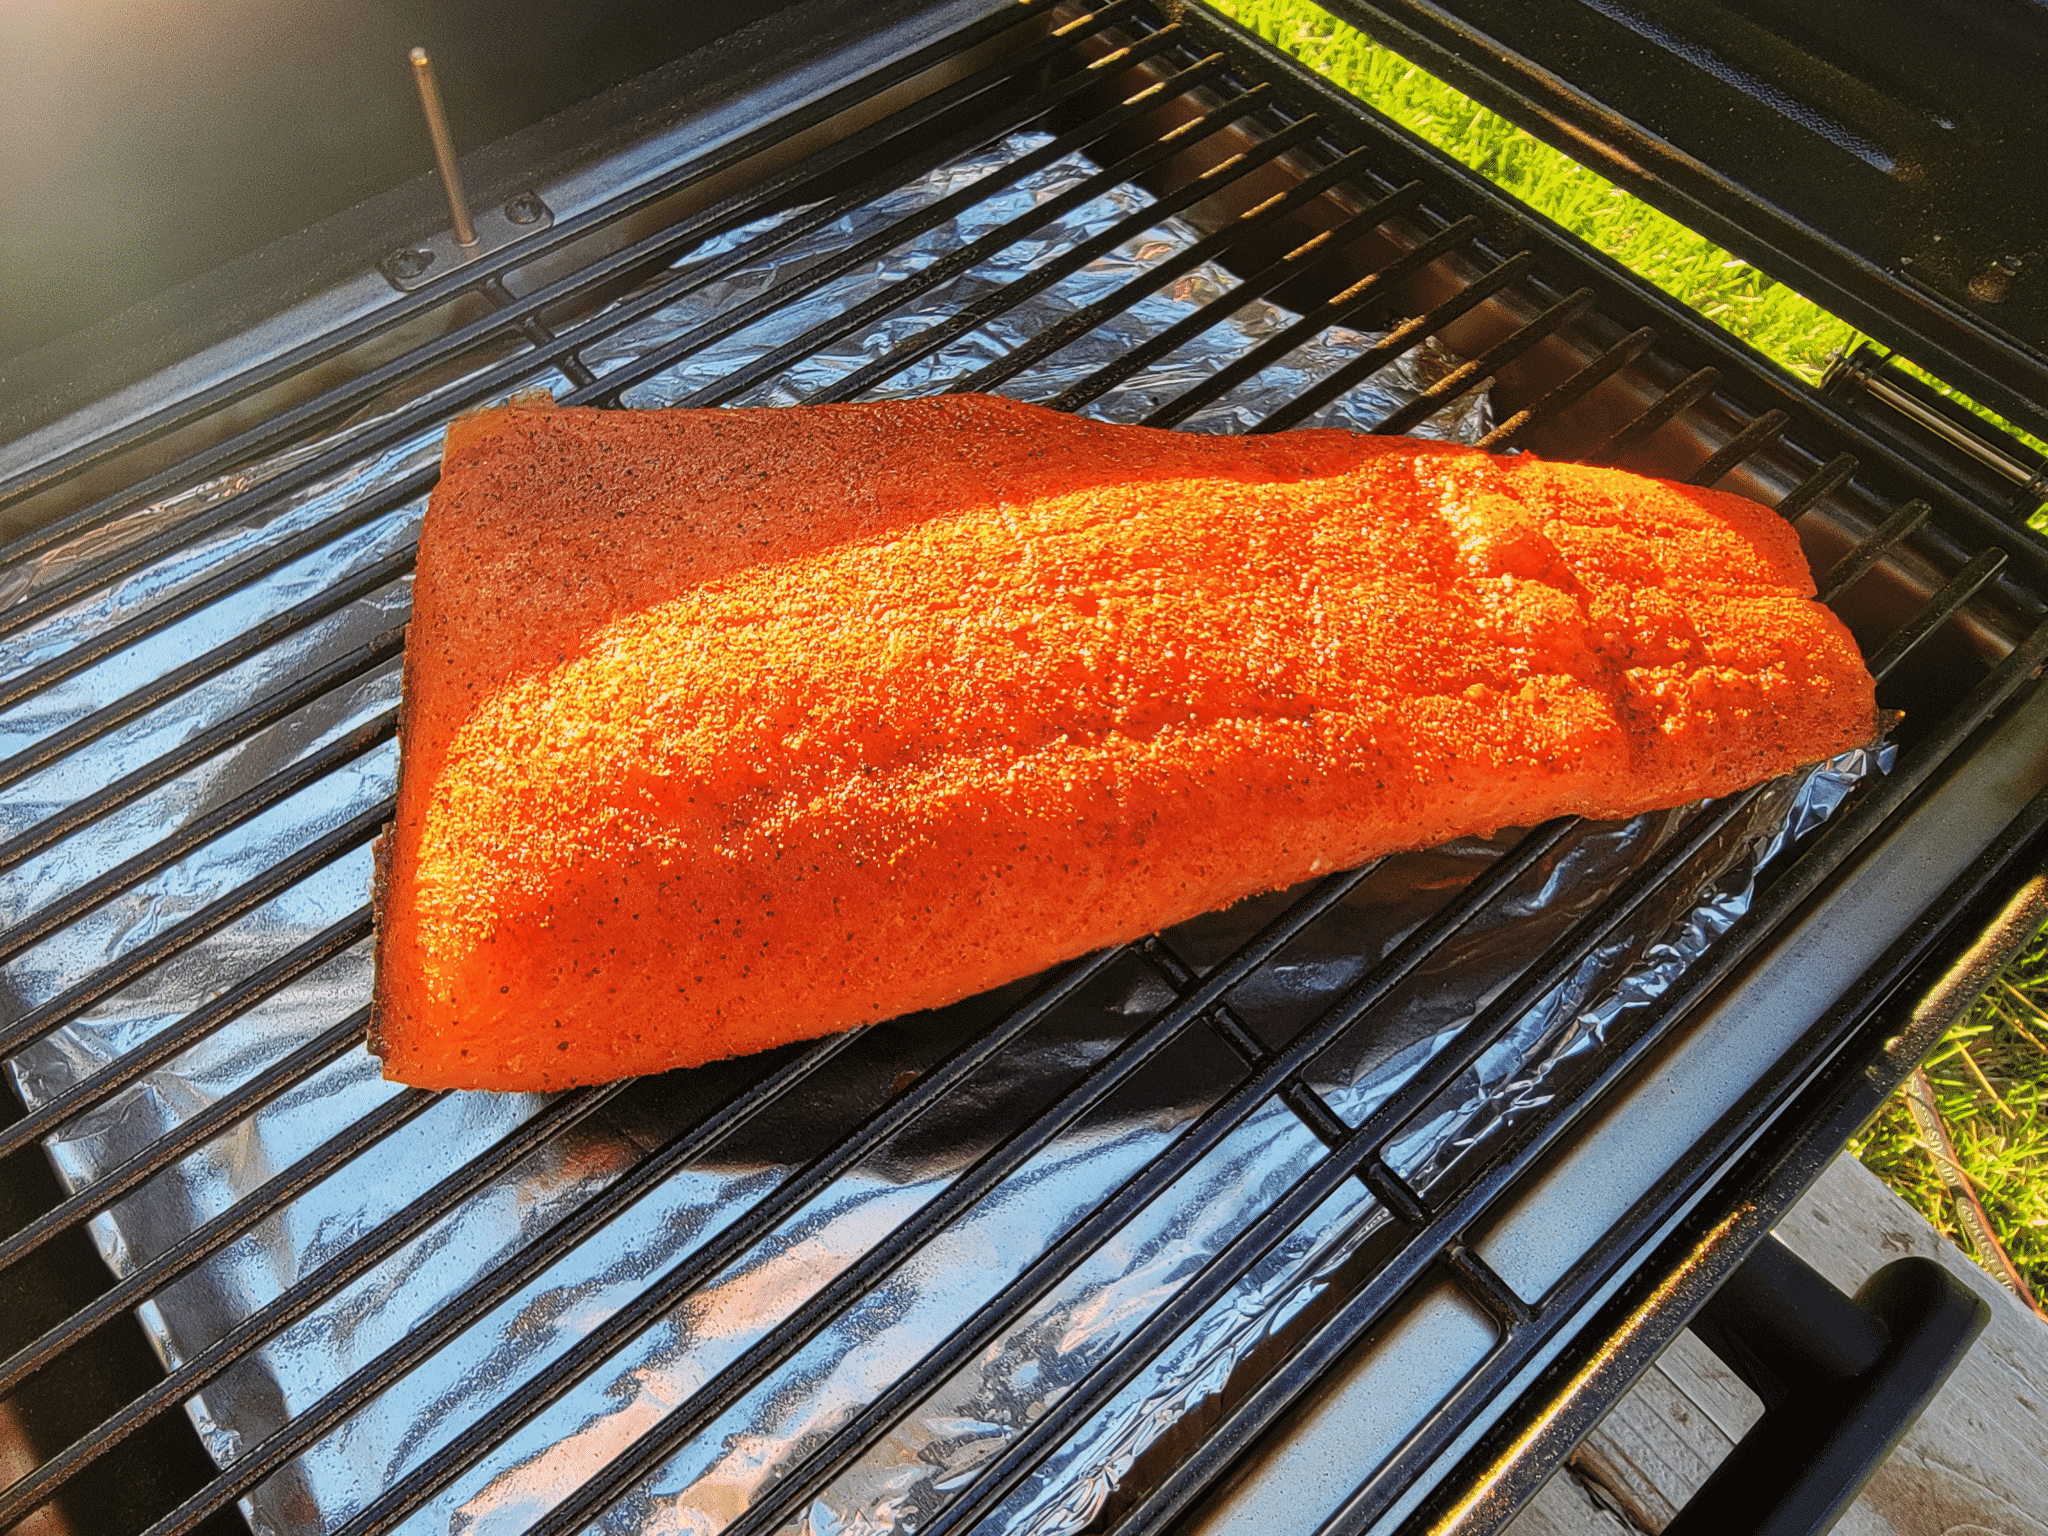 cruiser with salmon cooking on the grate